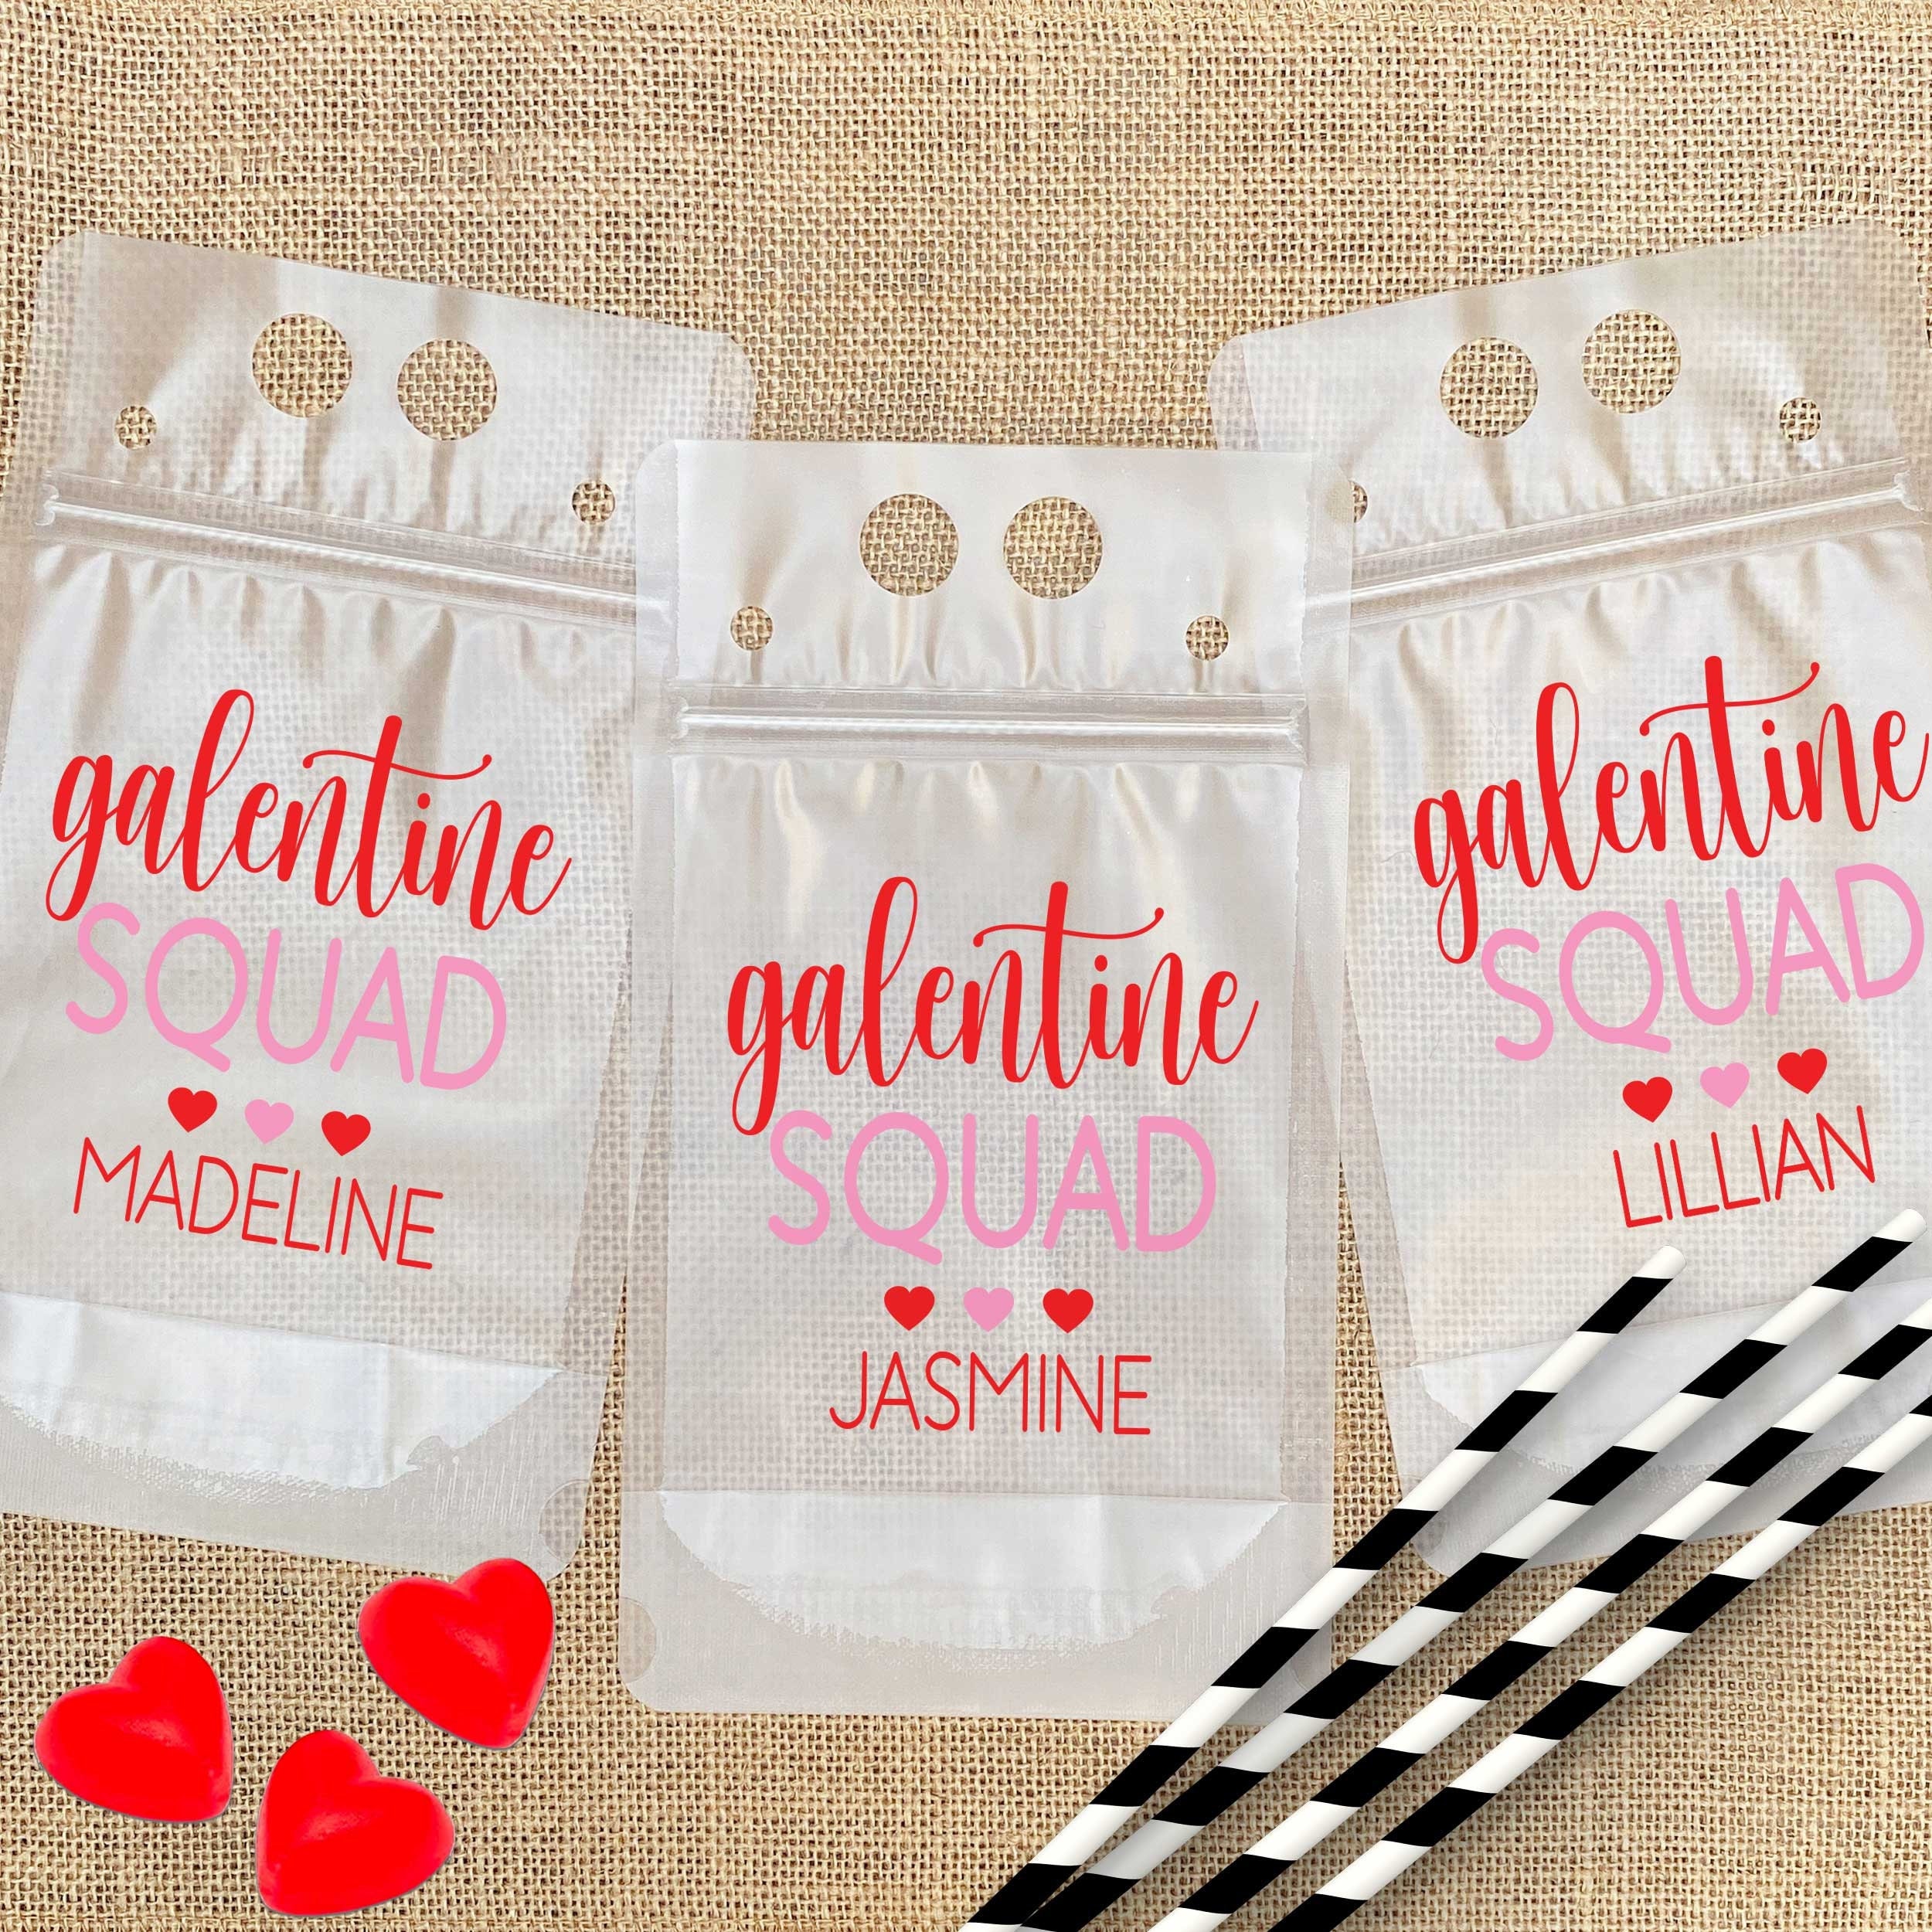 Galentines Day Gift for Friends Youre Like Really Pretty Makeup Bag Cute Valentines  Day Gifts for Her for Girlfriends EB3222NT 